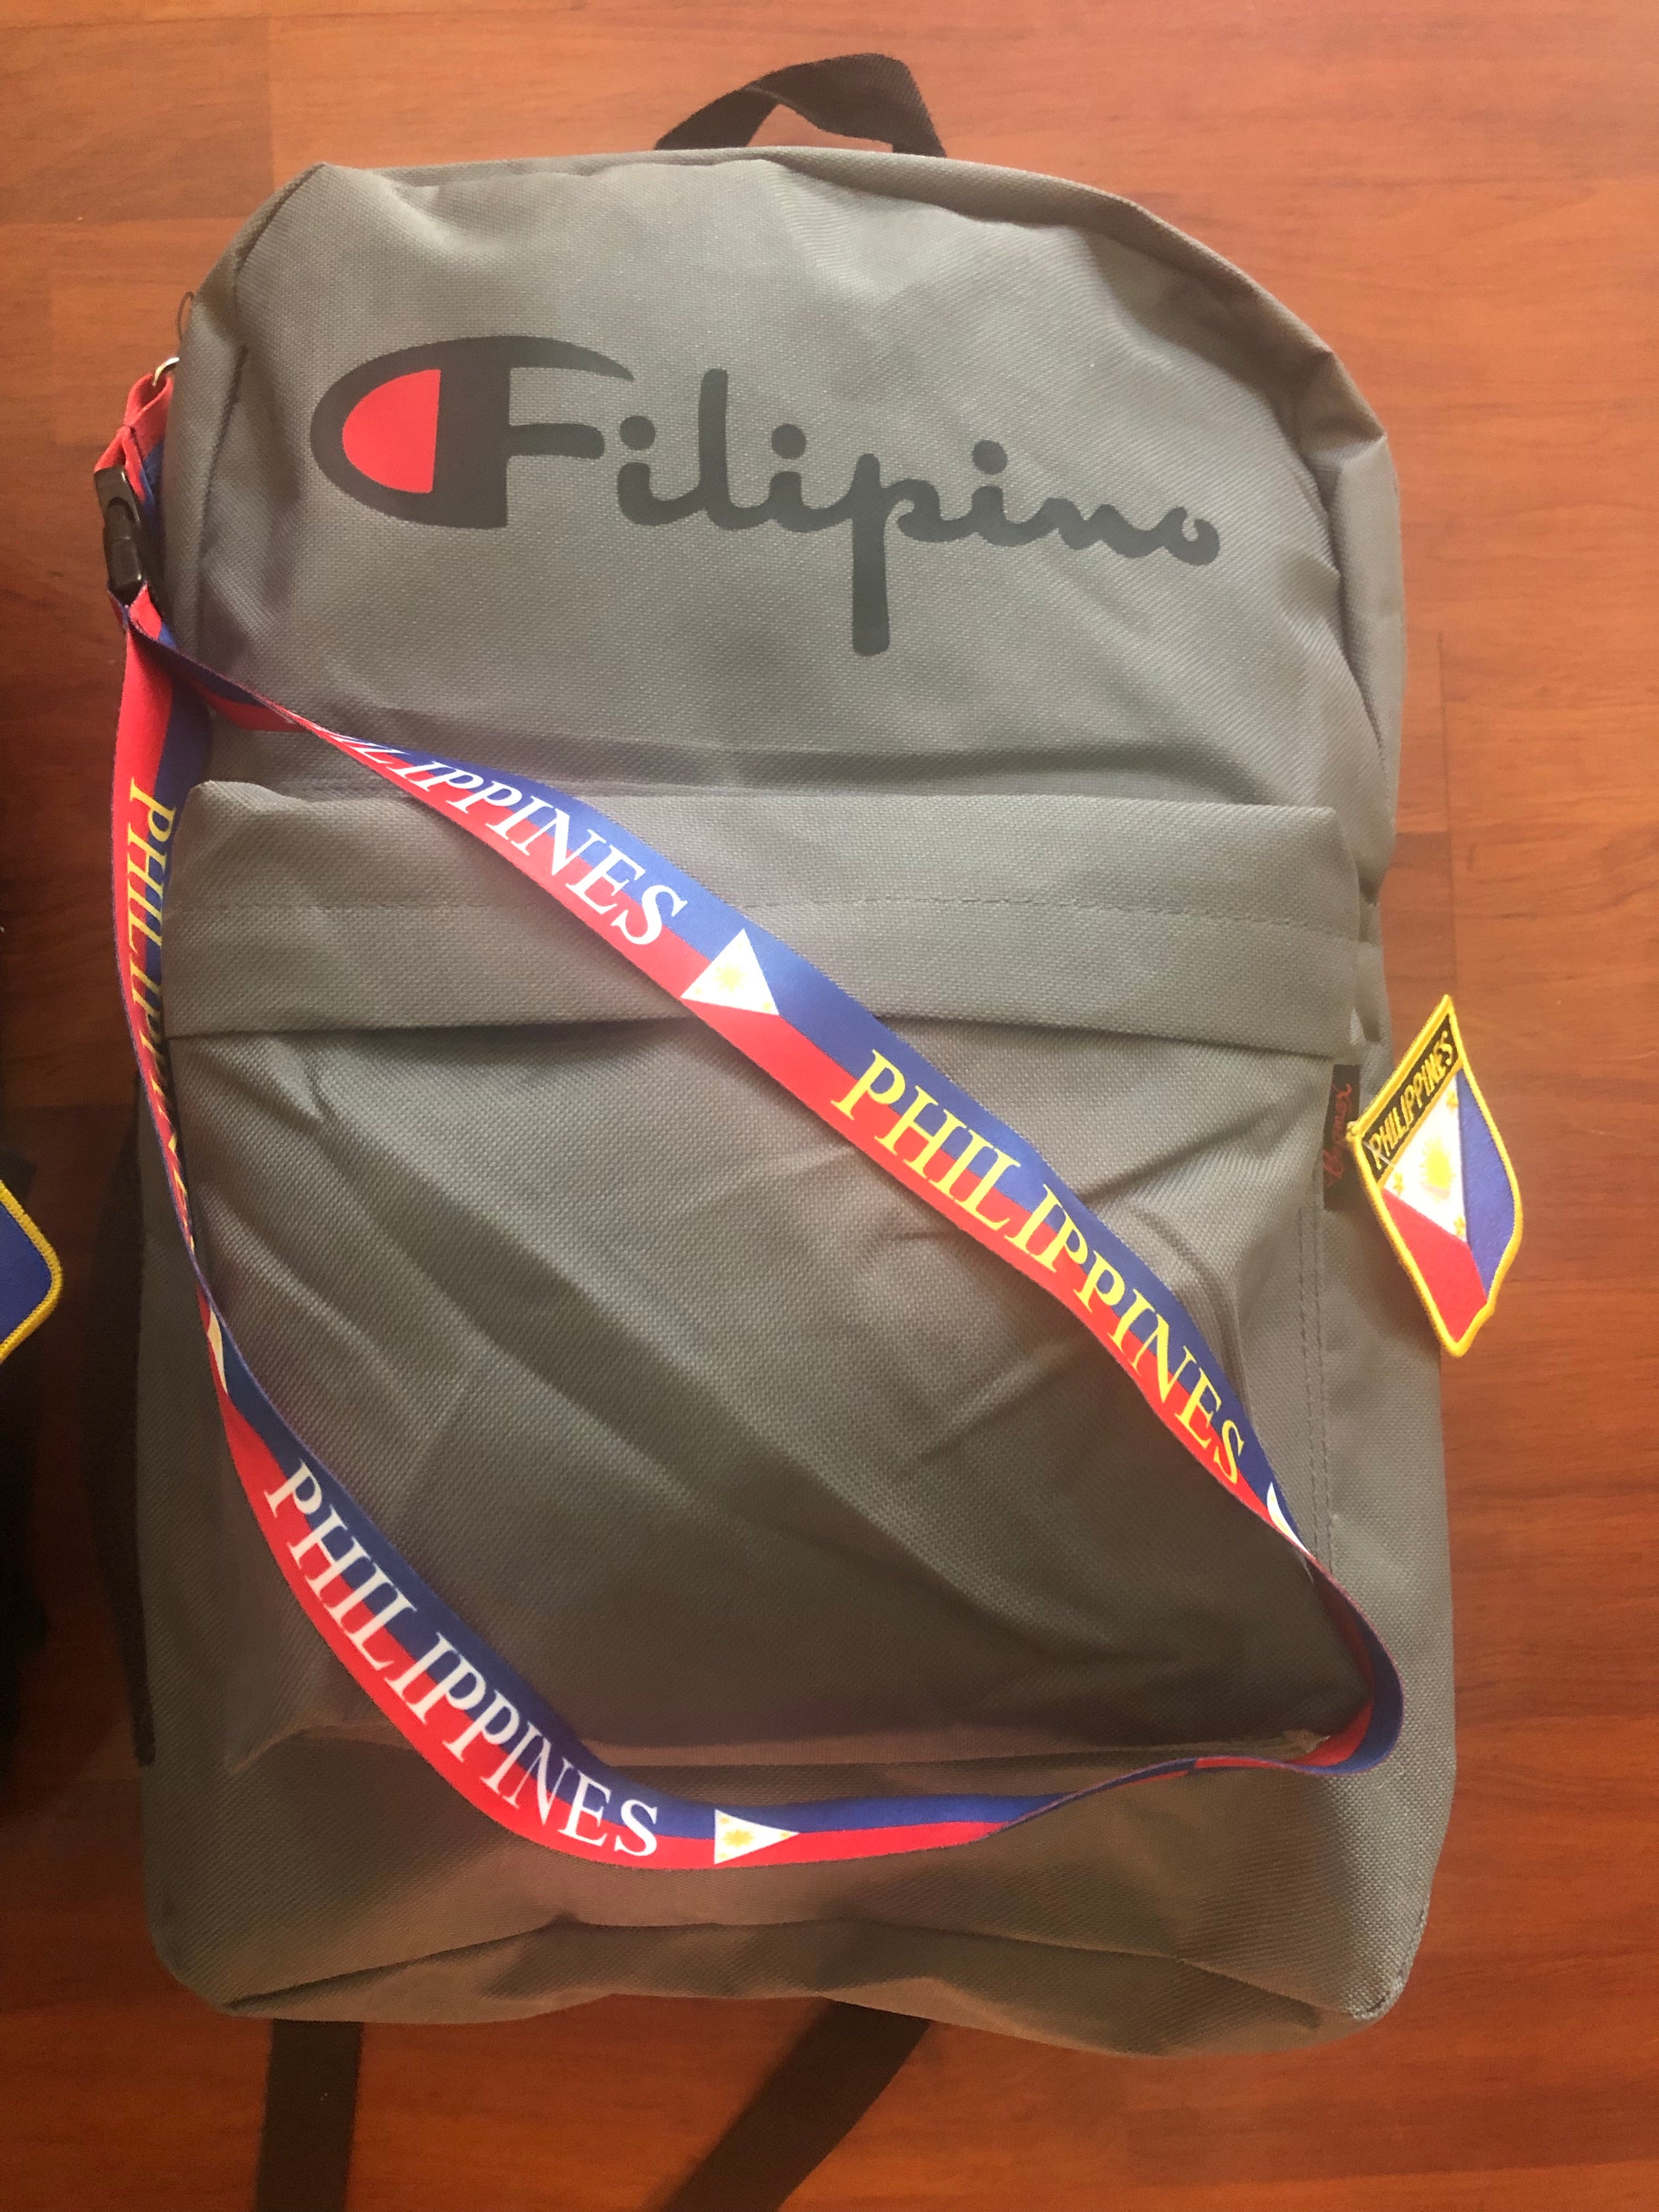 Filipino Champion Backpack Collection. Free Lanyard and Patch